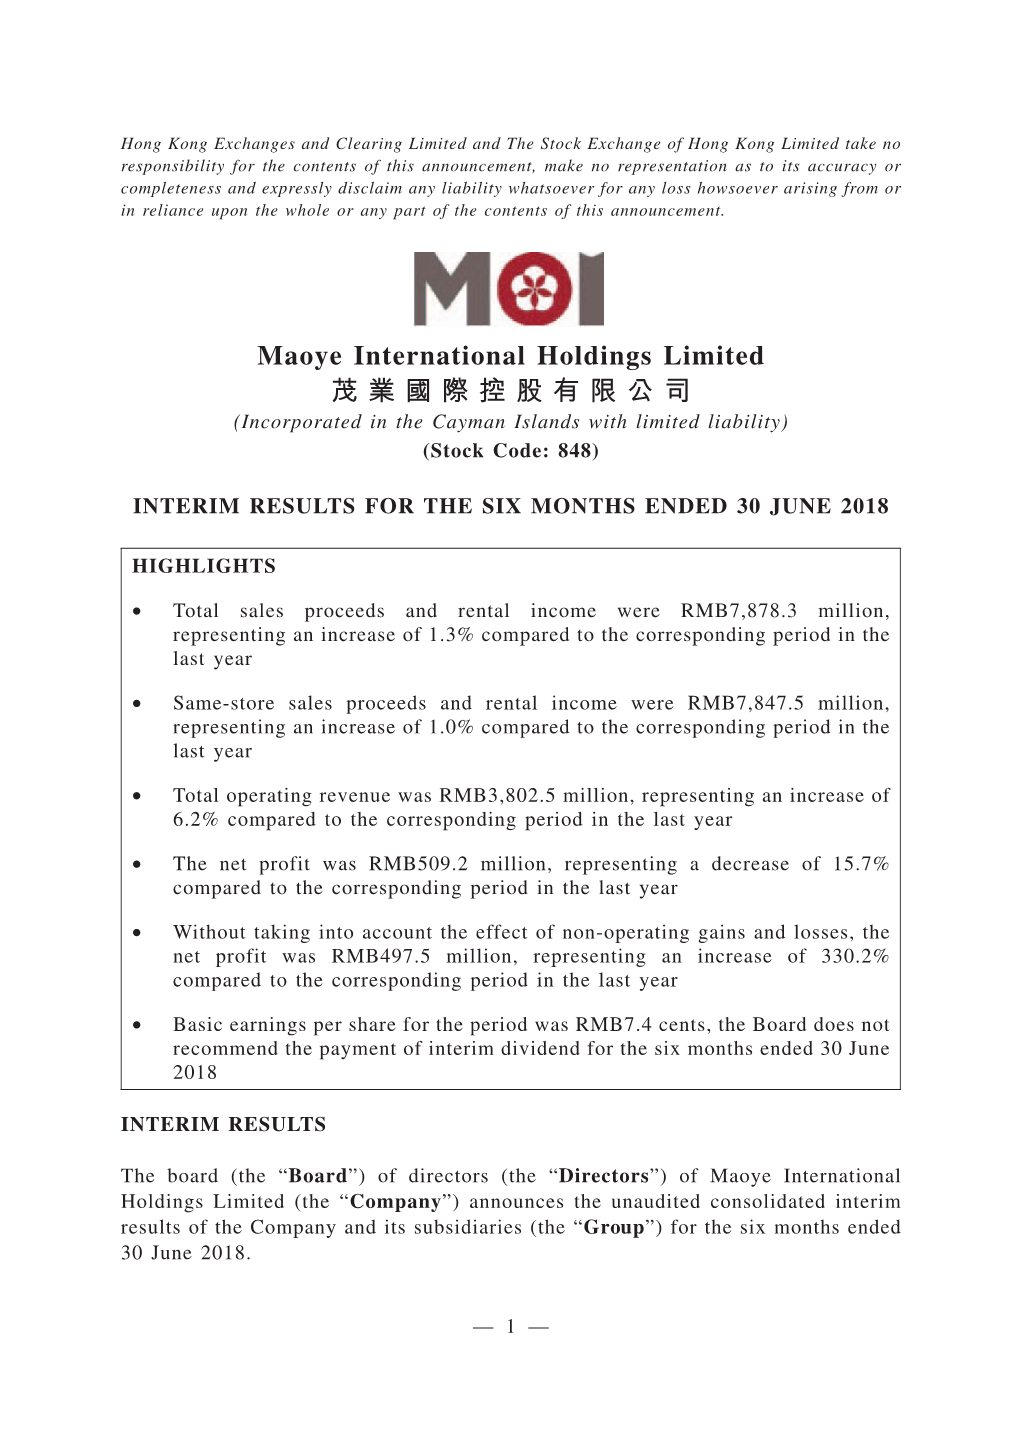 Maoye International Holdings Limited 茂業國際控股有限公司 (Incorporated in the Cayman Islands with Limited Liability) (Stock Code: 848)